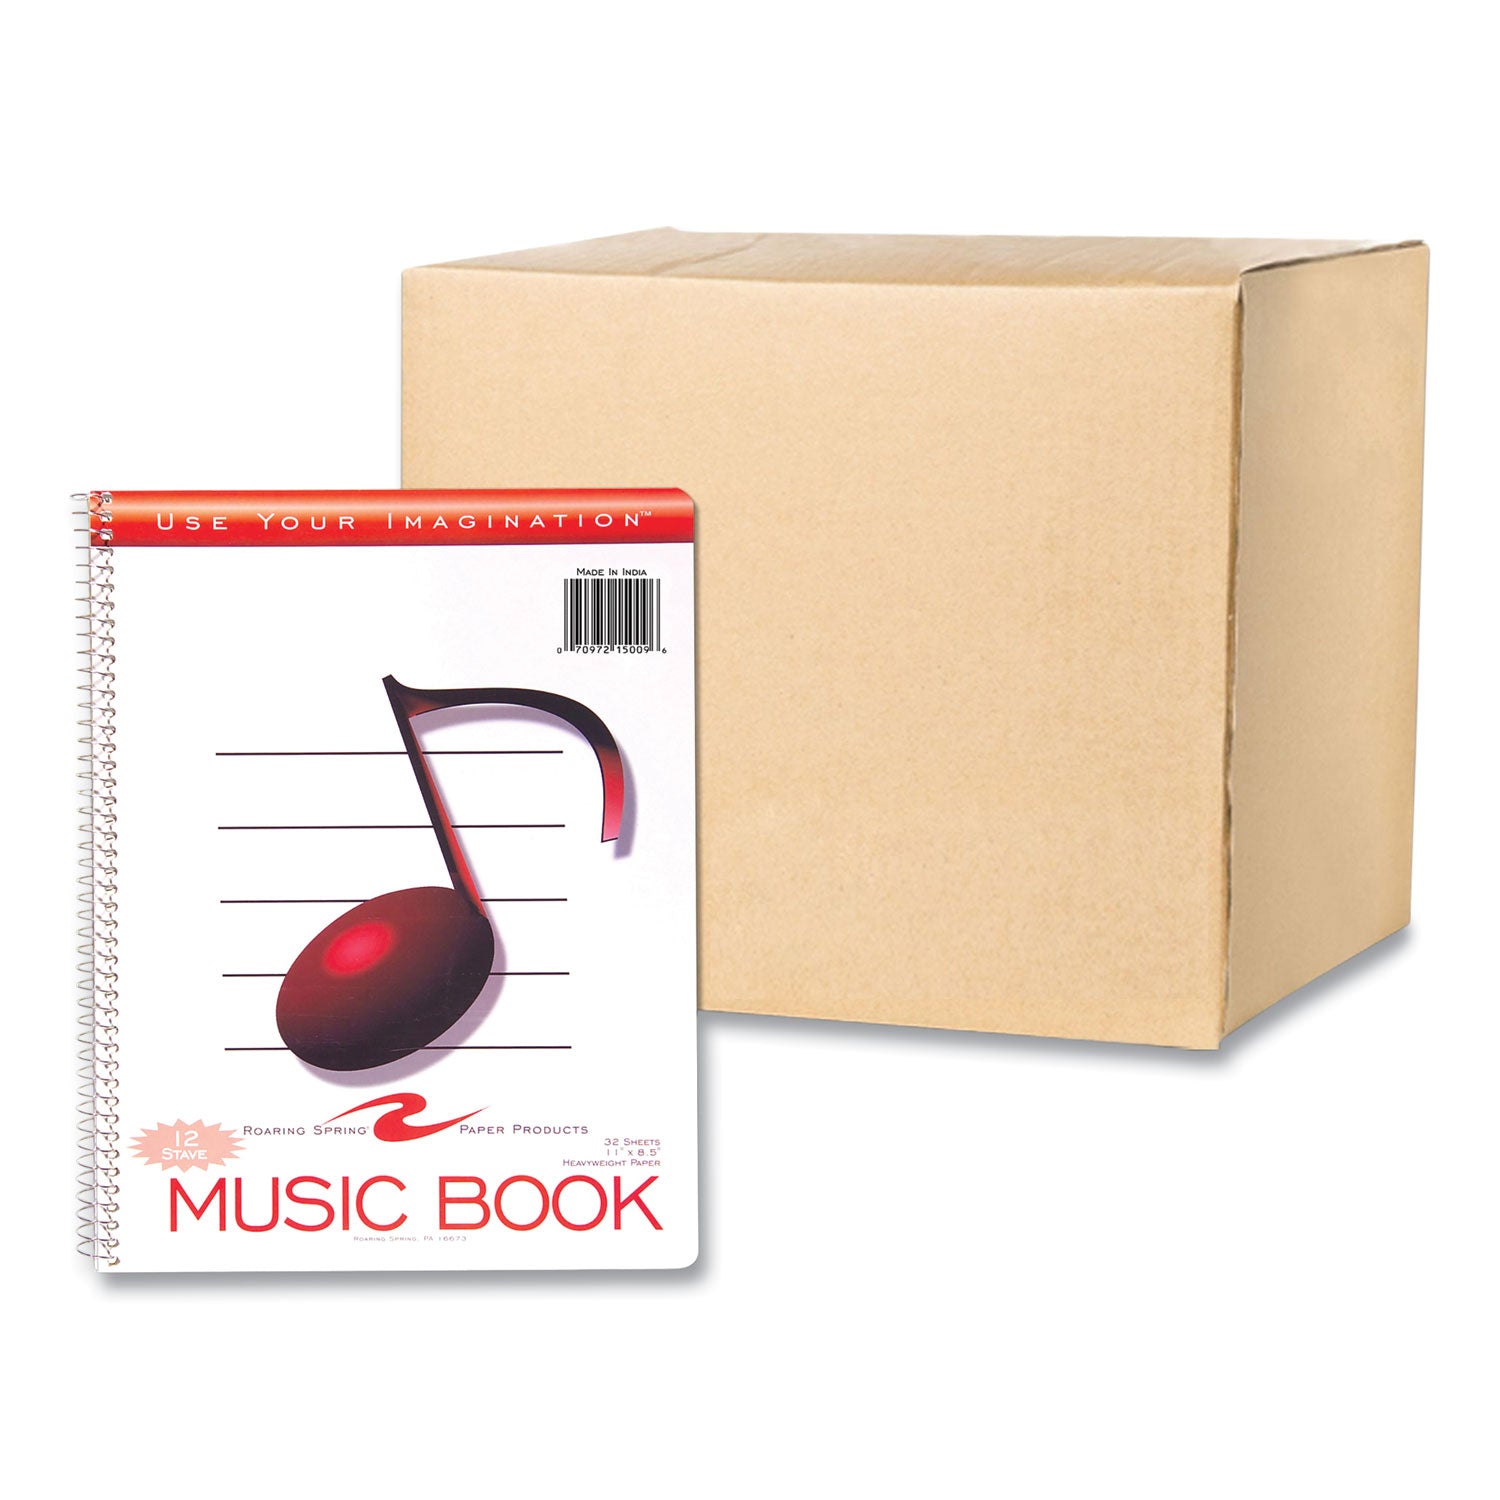 music-notebook-music-transcription-format-white-cover-32-11-x-85-sheets-24-carton-ships-in-4-6-business-days_roa15009cs - 1